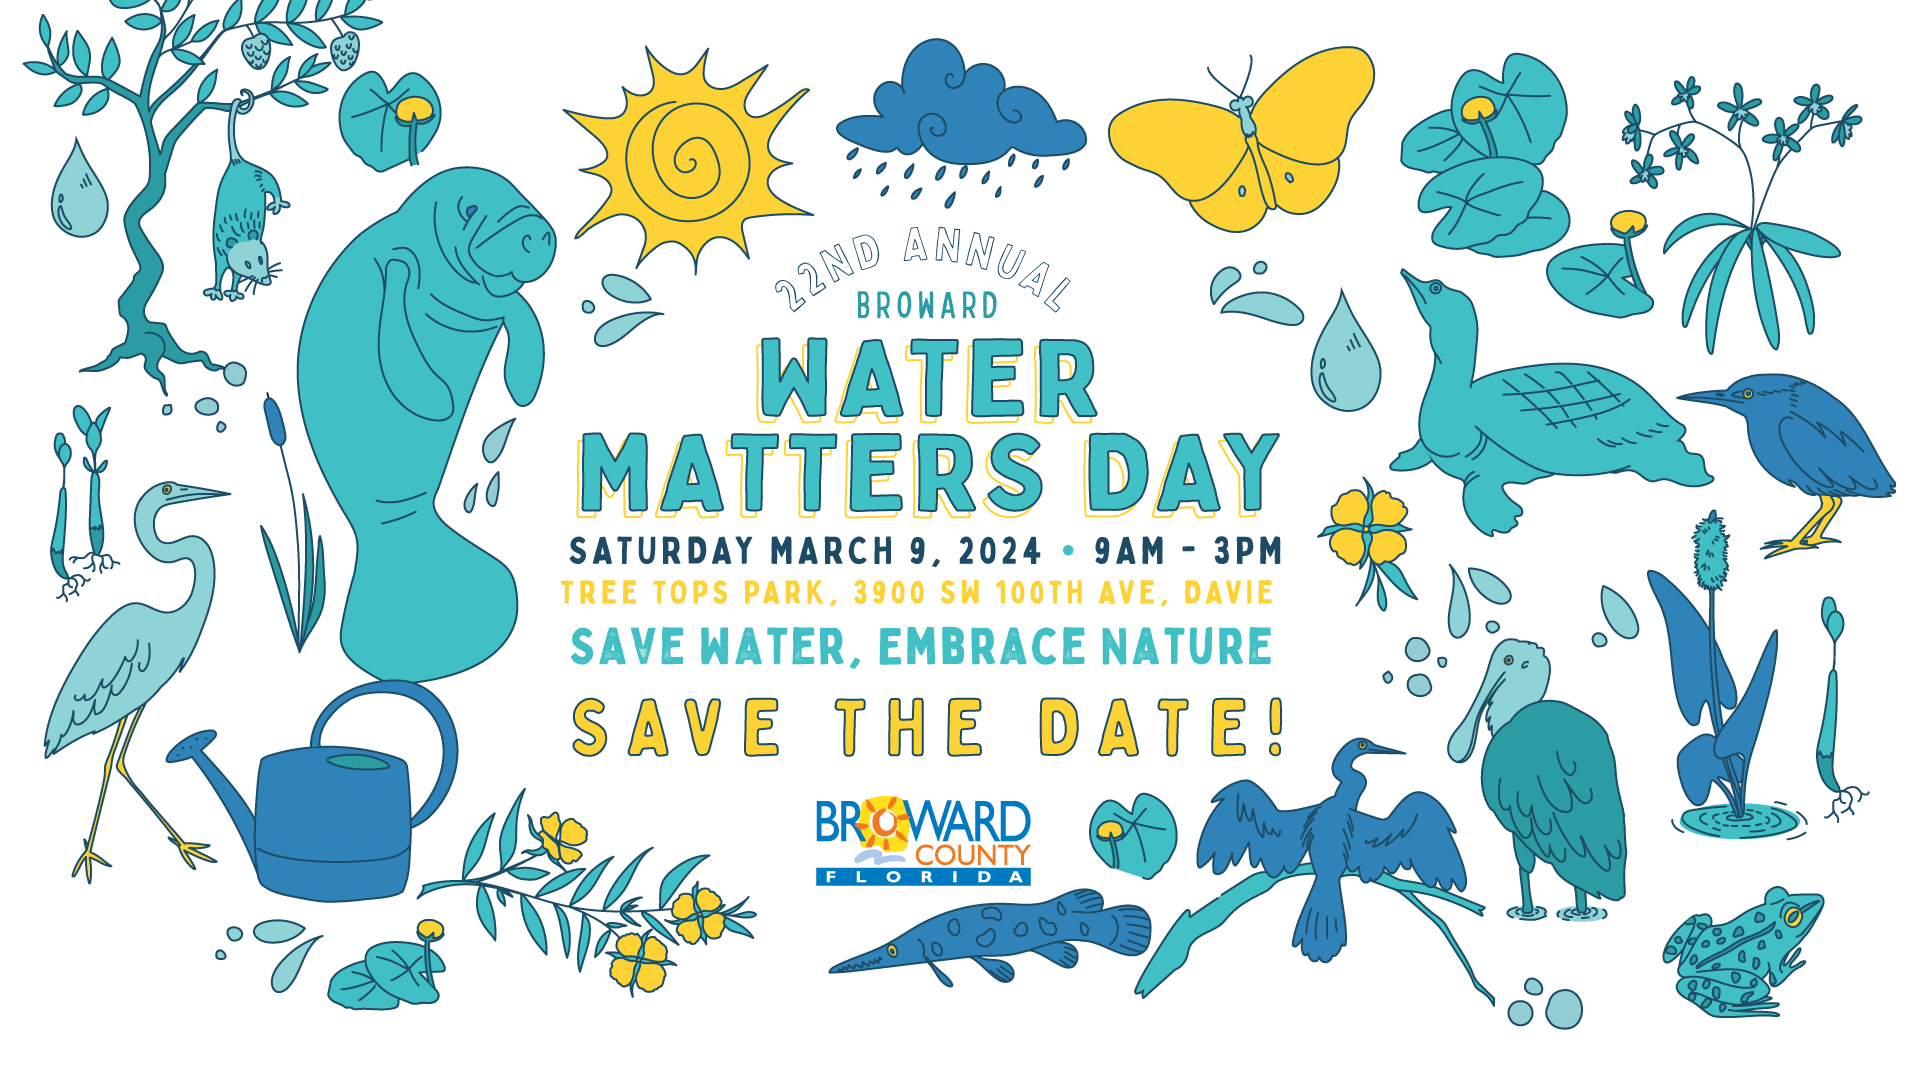 Broward County Water Matters Day